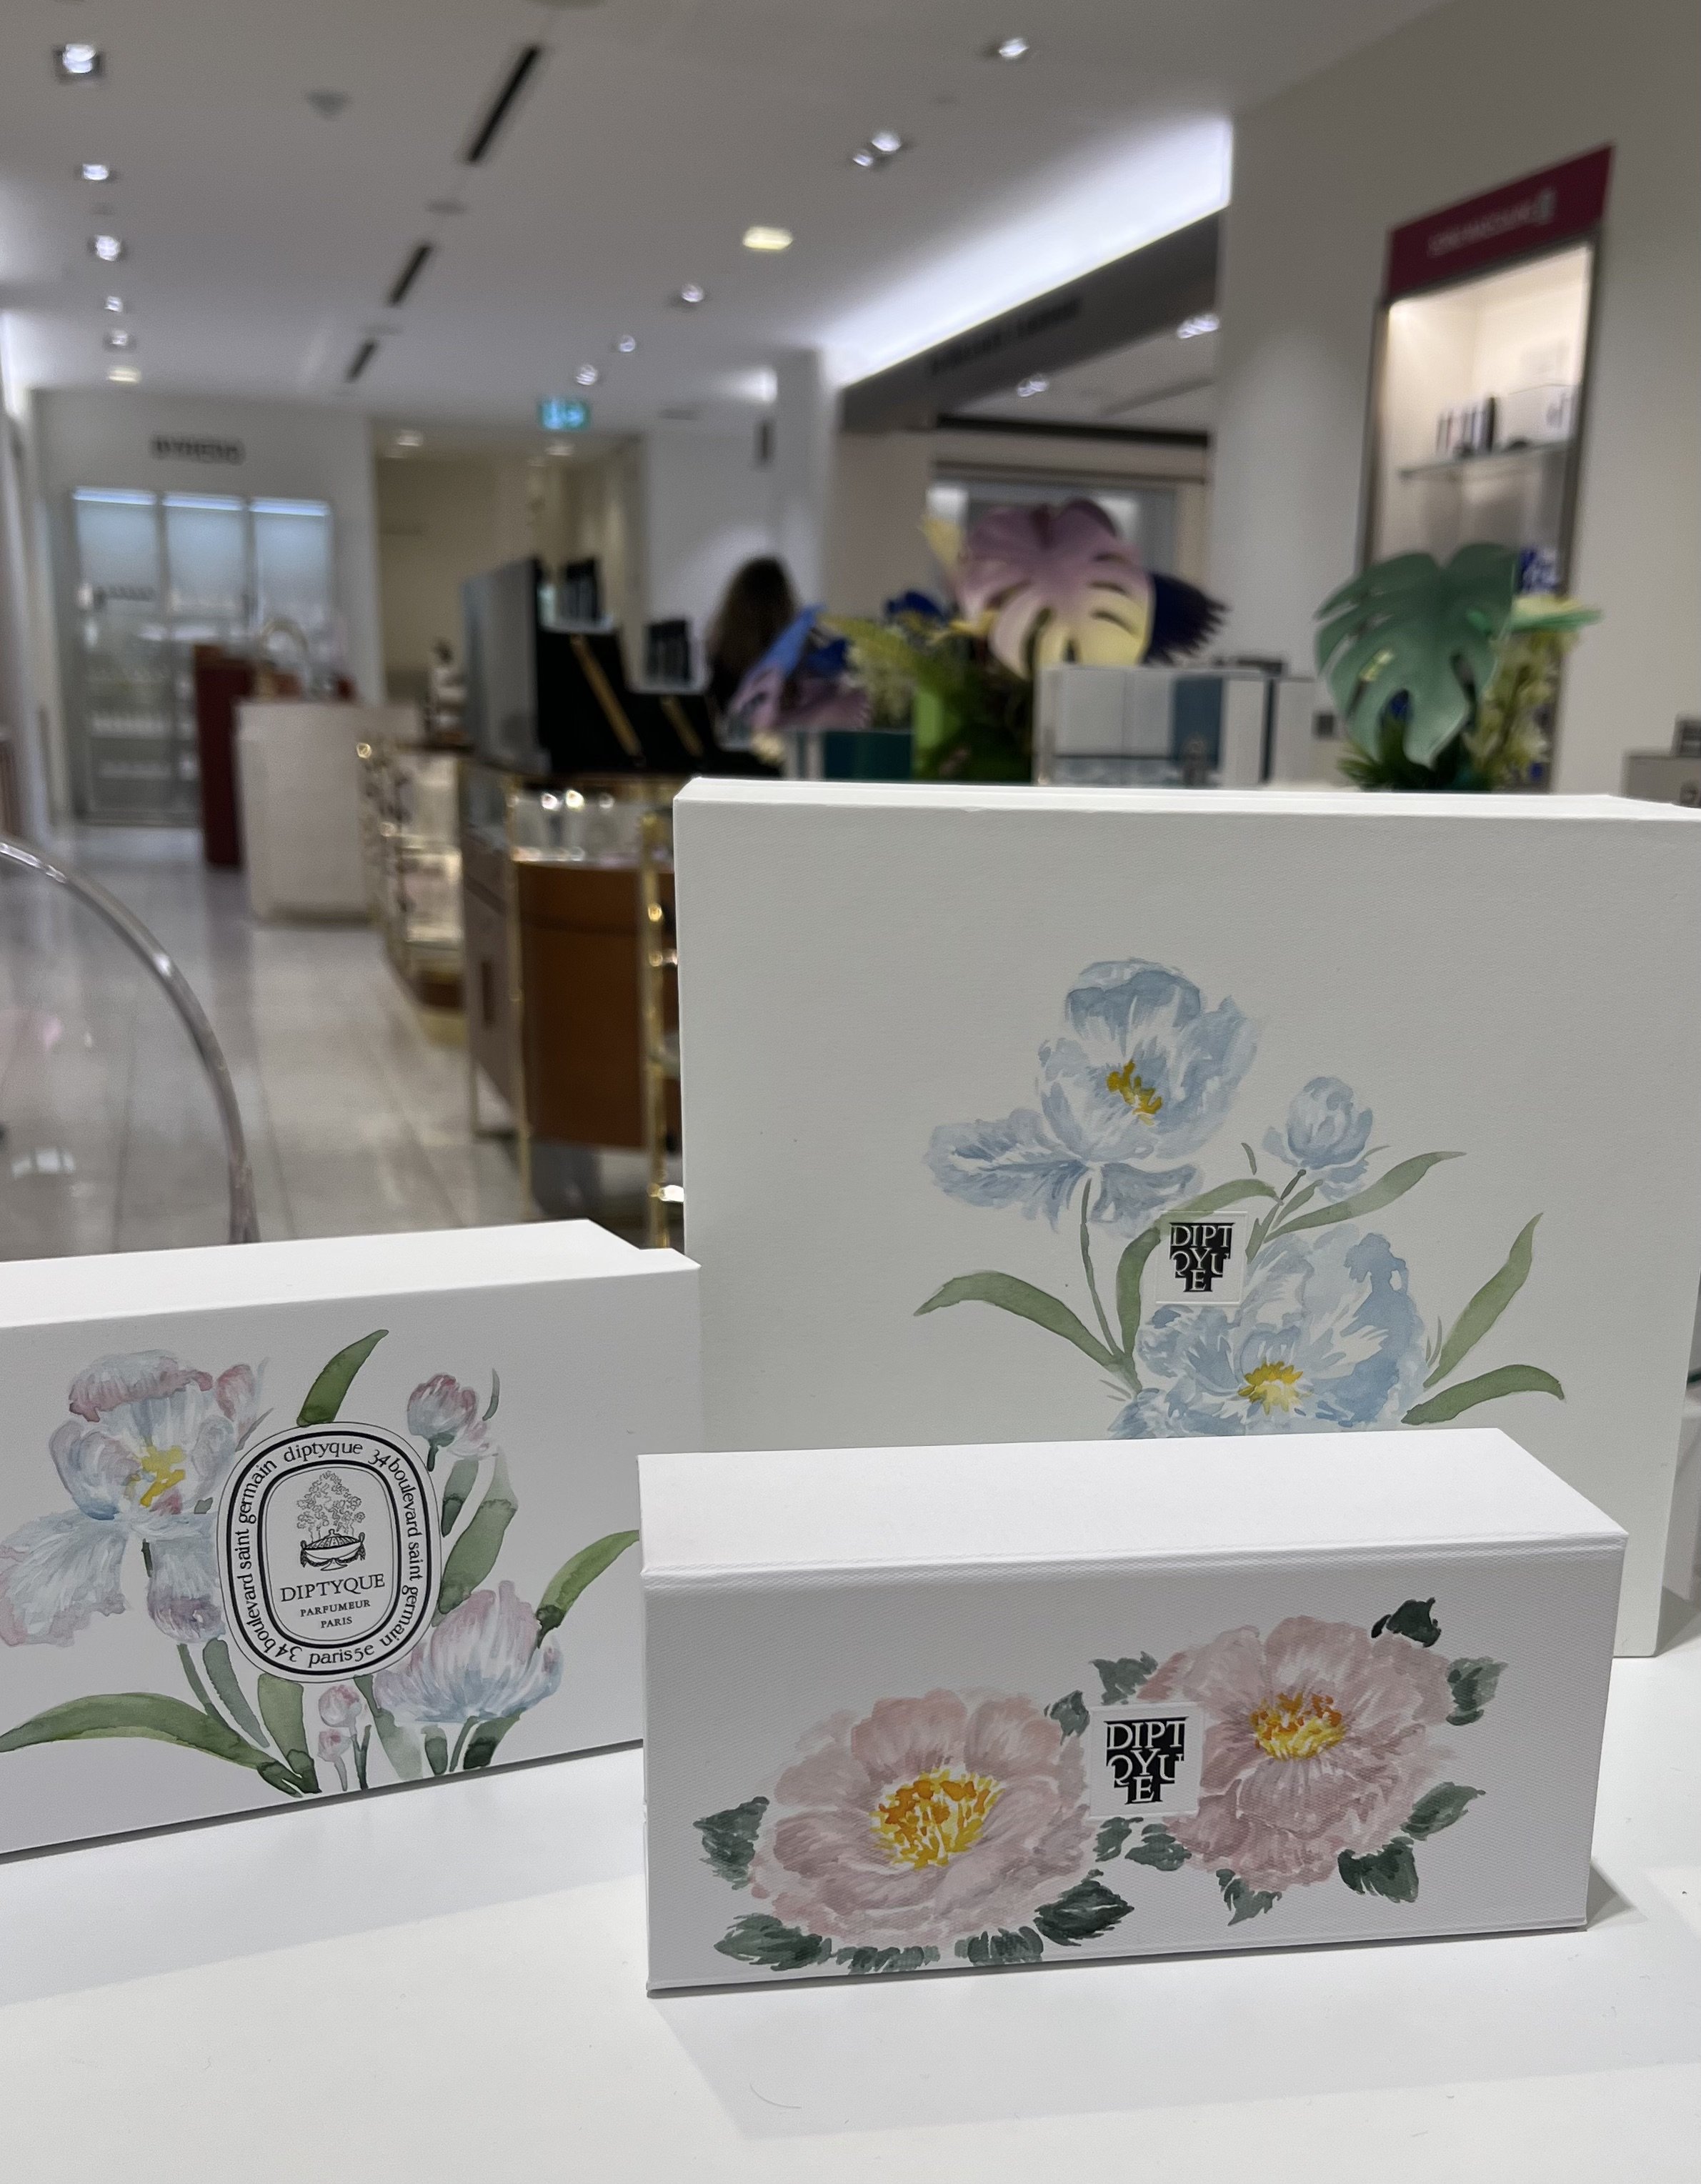 live-event-artist-in-montreal-paints-florals-on-luxury-packaging-at-holt-renfrew-ogilvy copy.jpeg